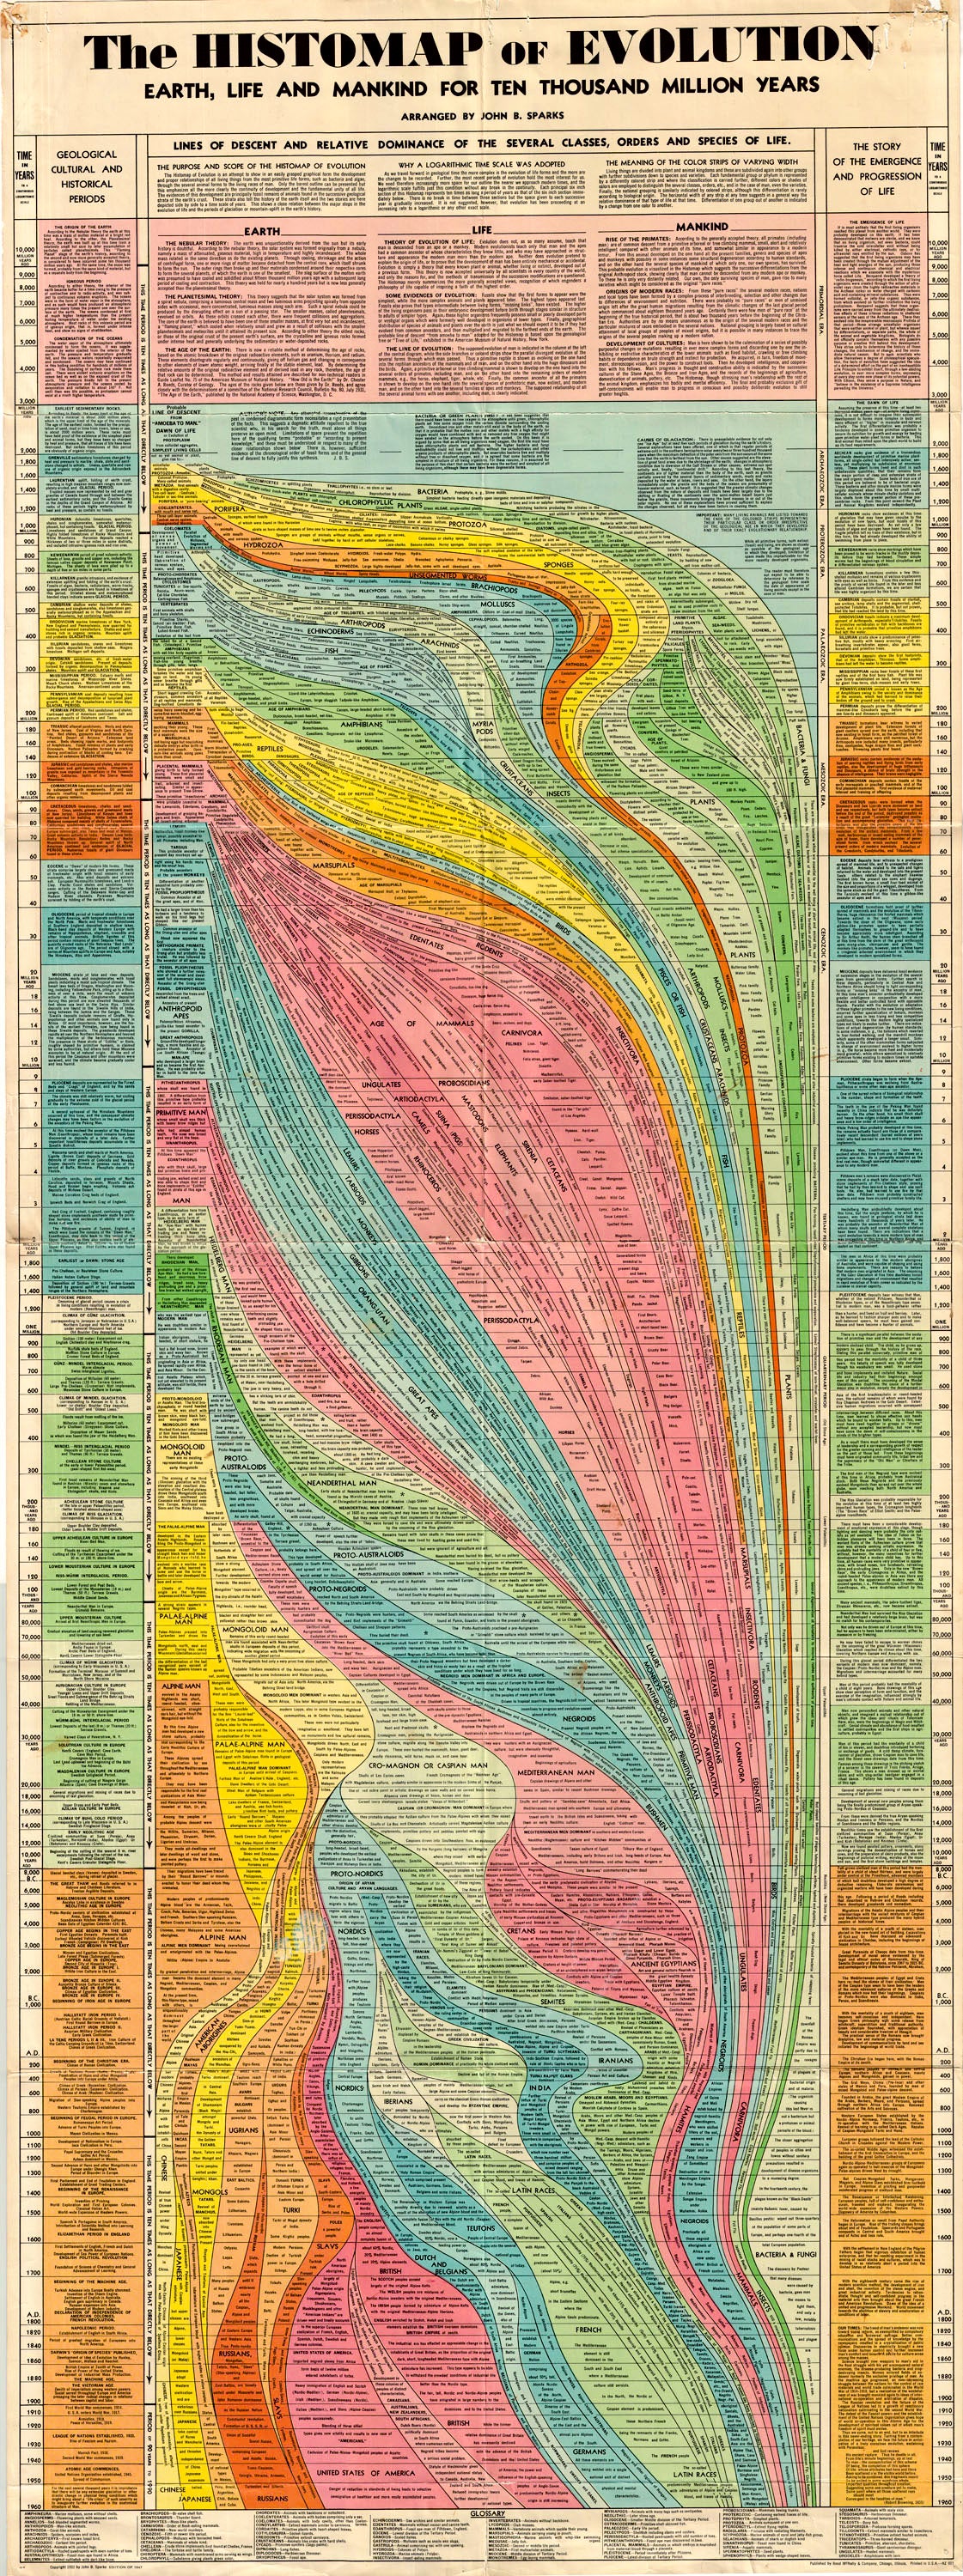 (Thematic) The Histomap Of Evolution Earth, Life and Mankind For Ten Thousand Million Years